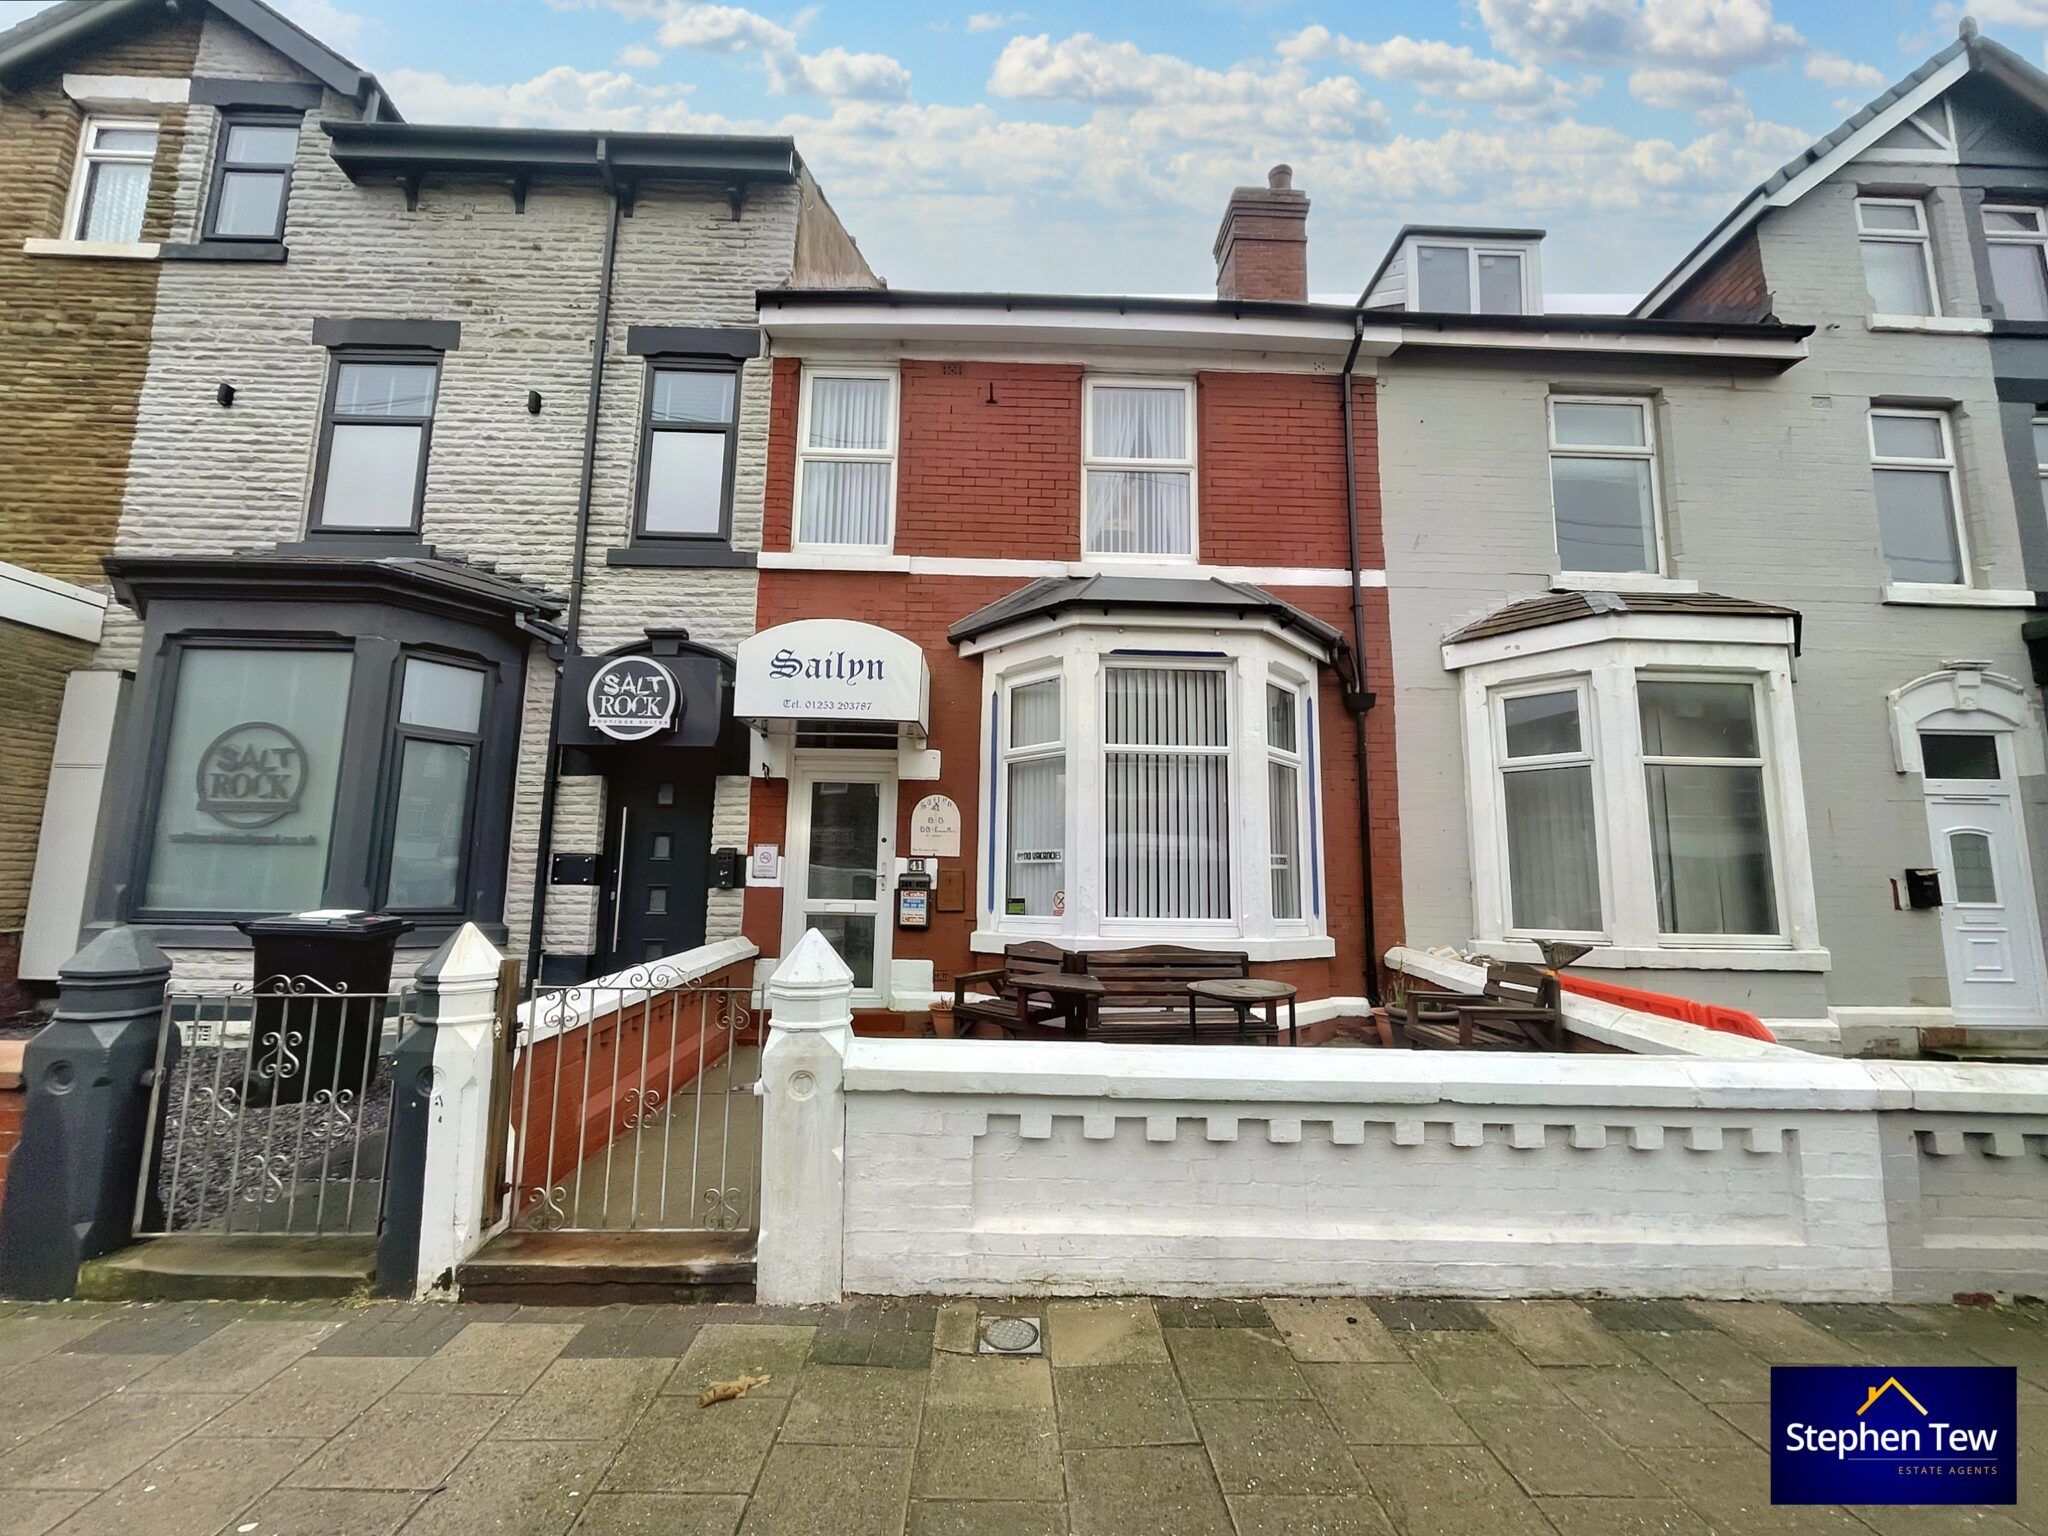 Sailyn Guest House, 41 Palatine Road, Blackpool, Blackpool, FY1 4BX